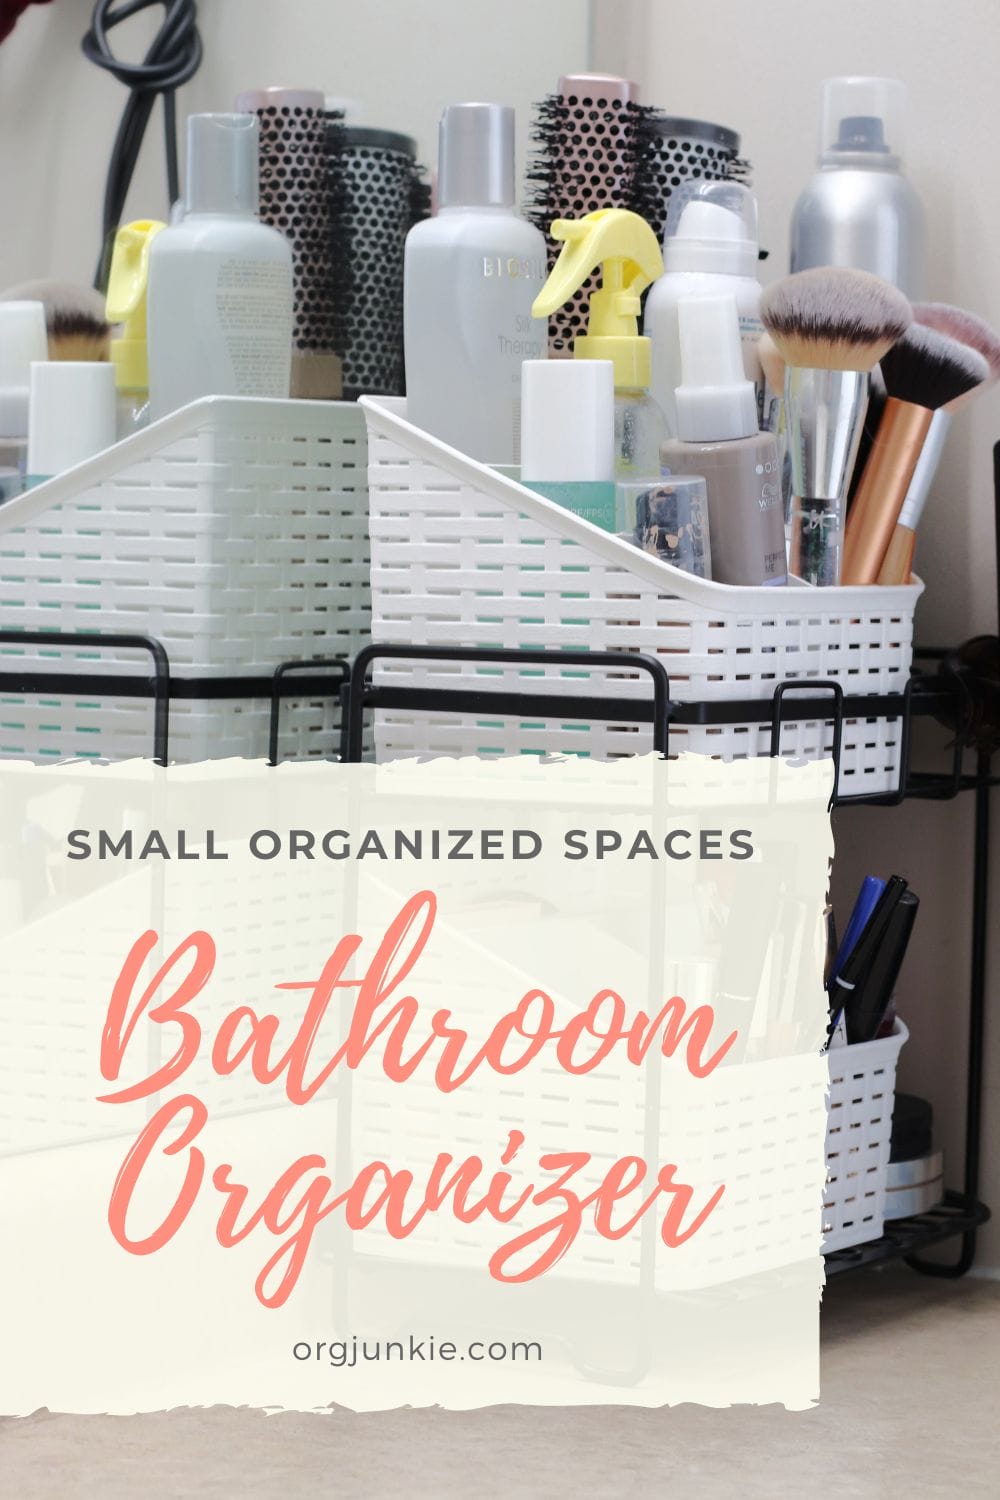 Small Organized Spaces ~ Bathroom Organizer for Your Products